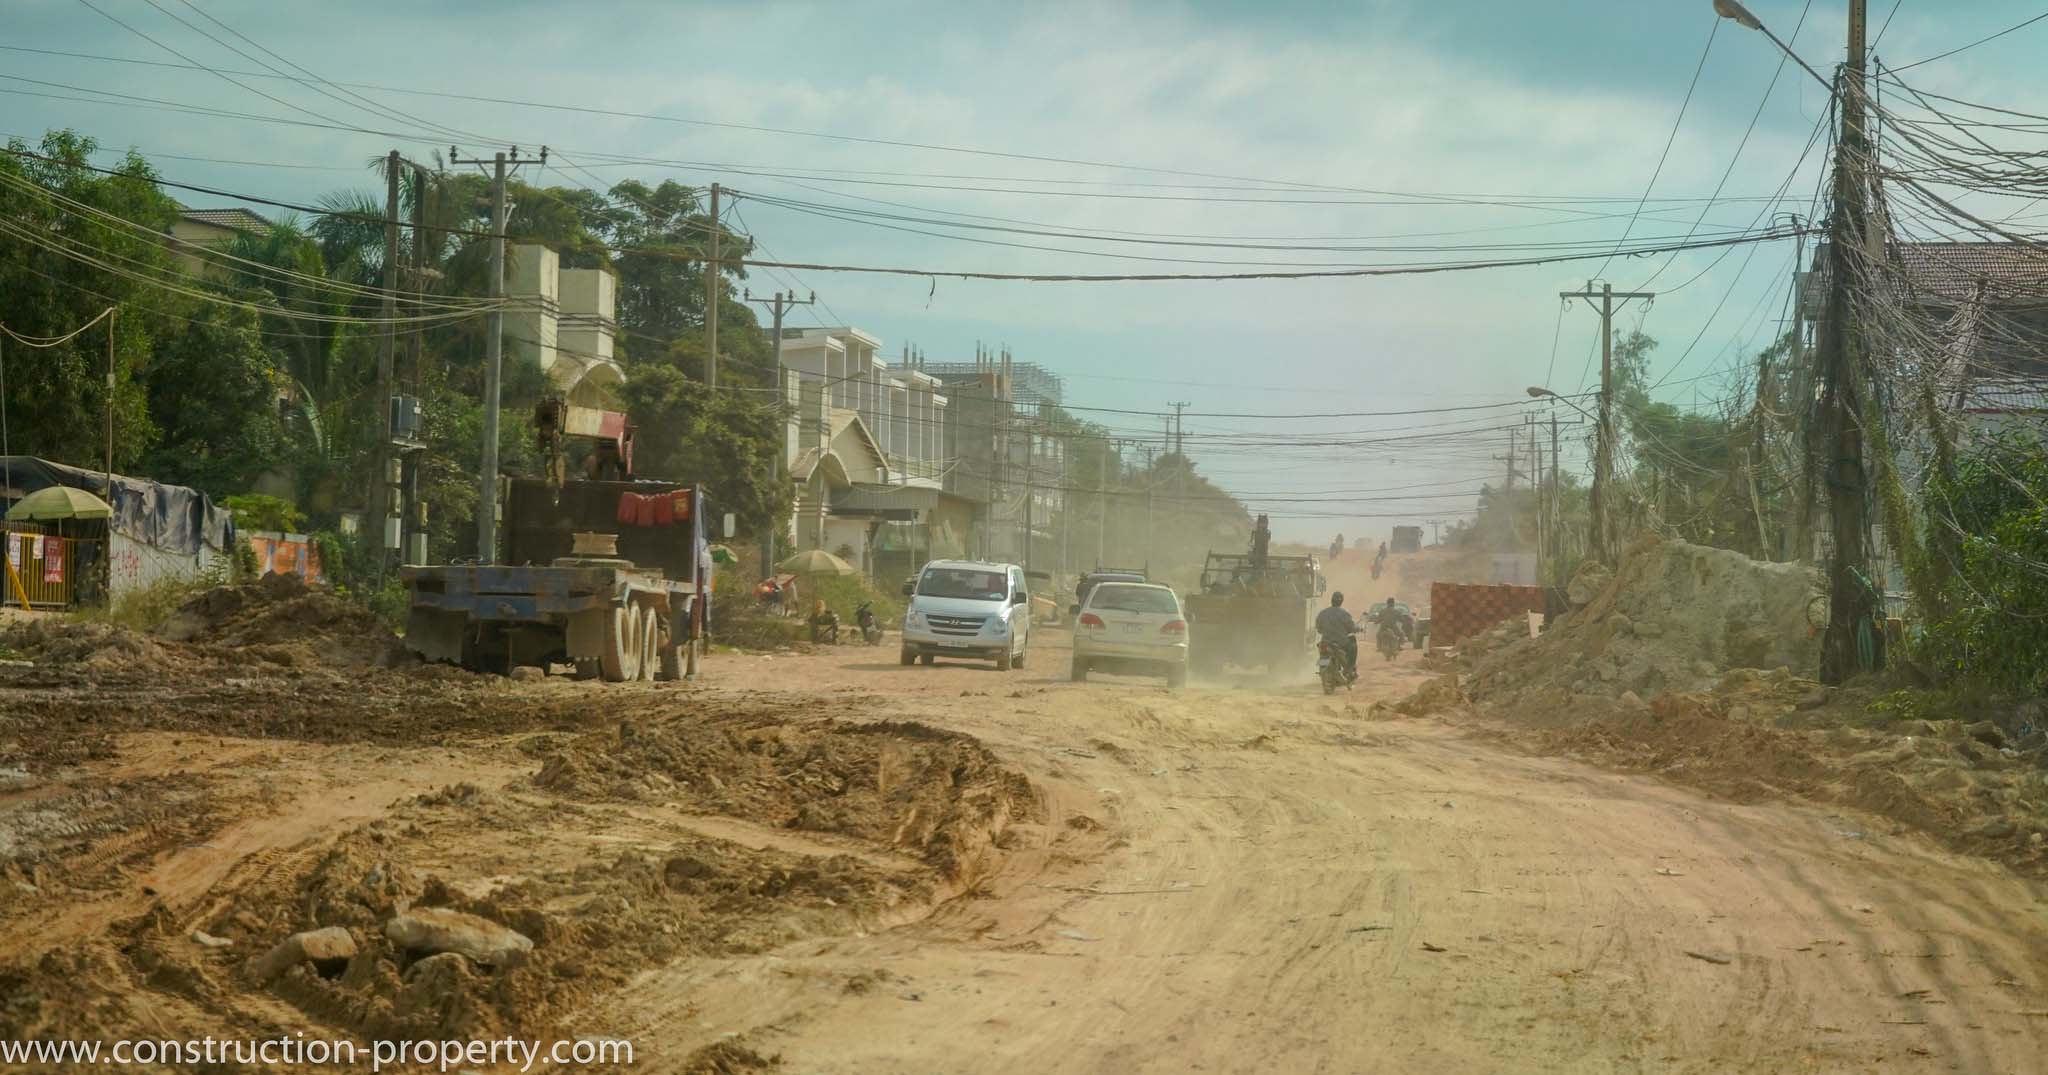 Construction contract for 34 roads in Sihanoukville set for November